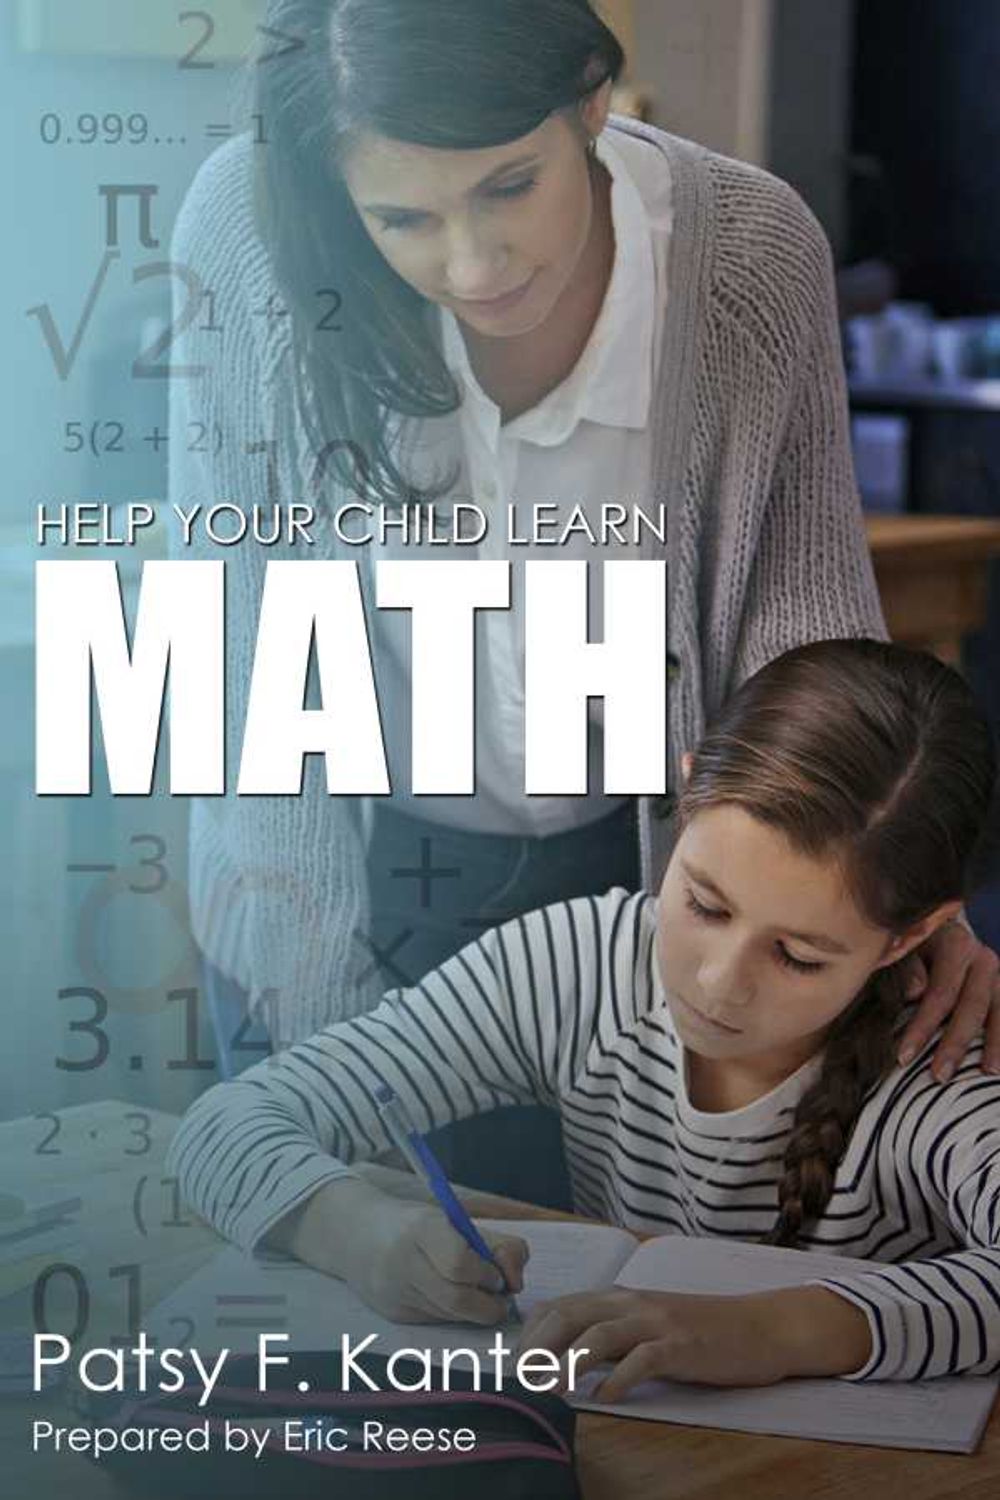 bw-helping-your-child-learn-math-eric-reese-9783962558666